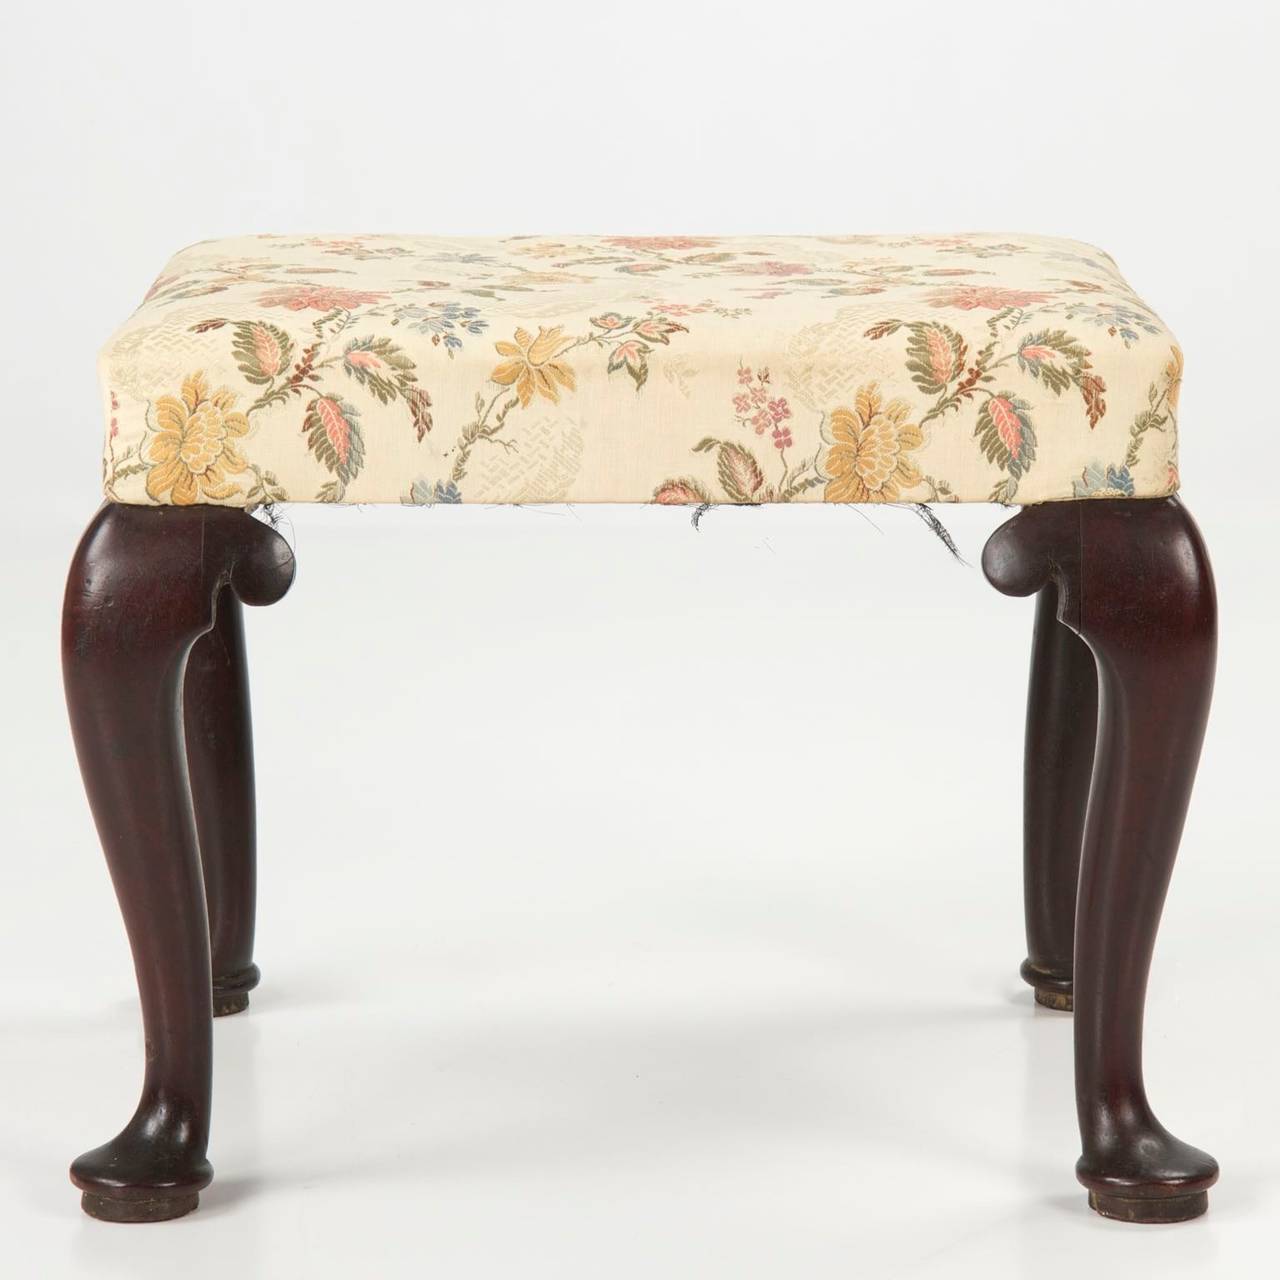 A precious and rare find, this fine English George II period foot stool remains in positively pristine condition.  The early finish is oxidized, dry and full of character along the handsomely carved cabriole legs with plain scrolled returns.  The